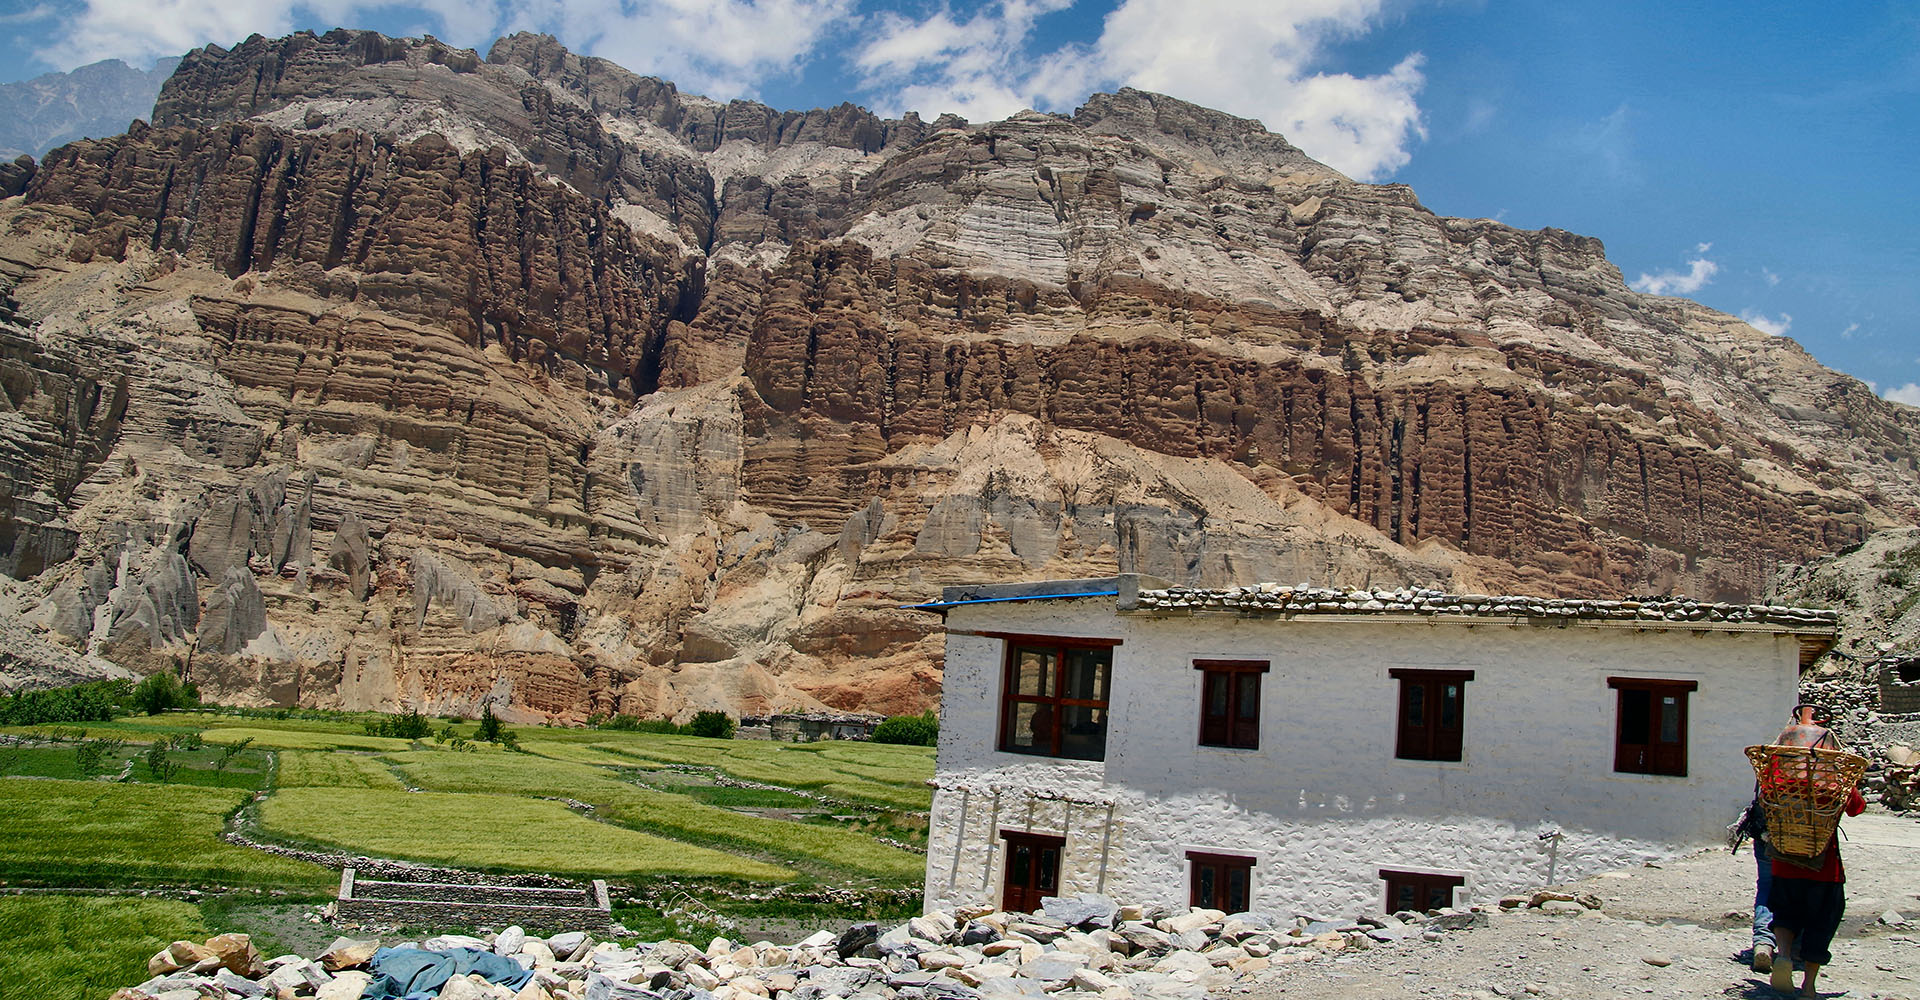 Landscapes in Upper Mustang Nepal.